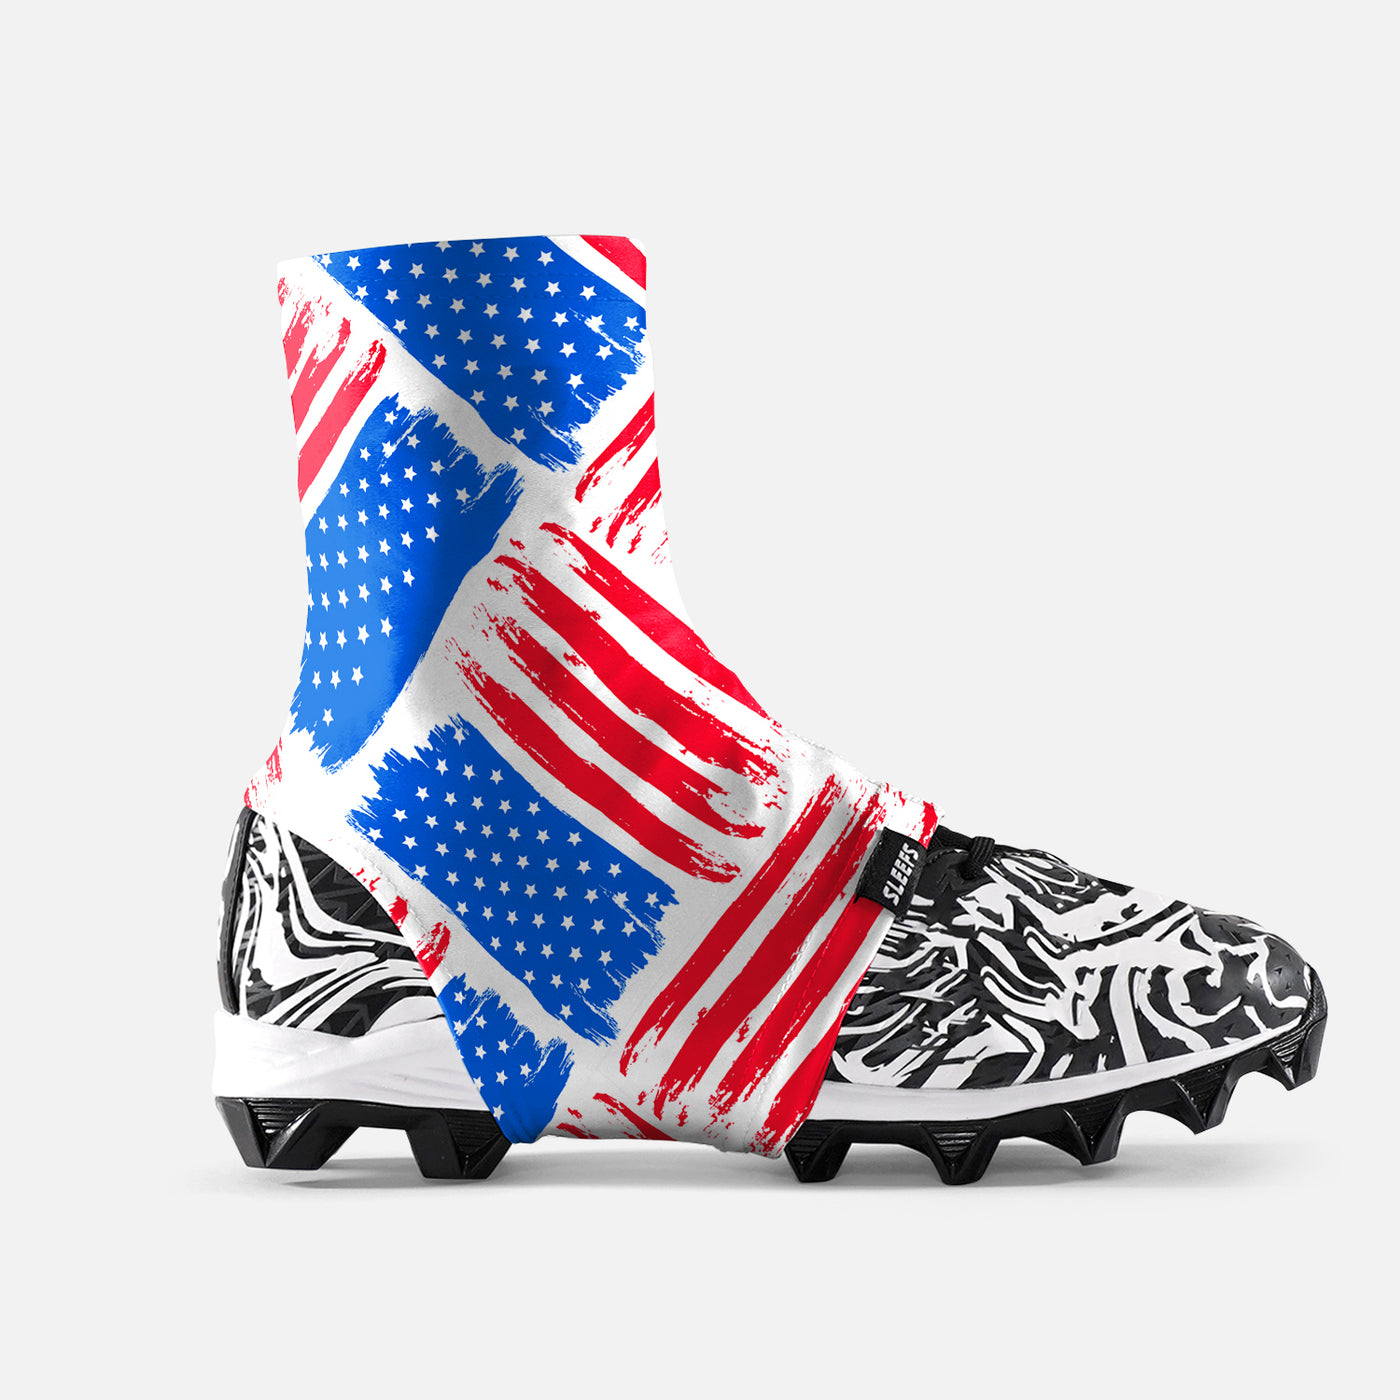 USA Brushed Flag Kids Spats / Cleat Covers